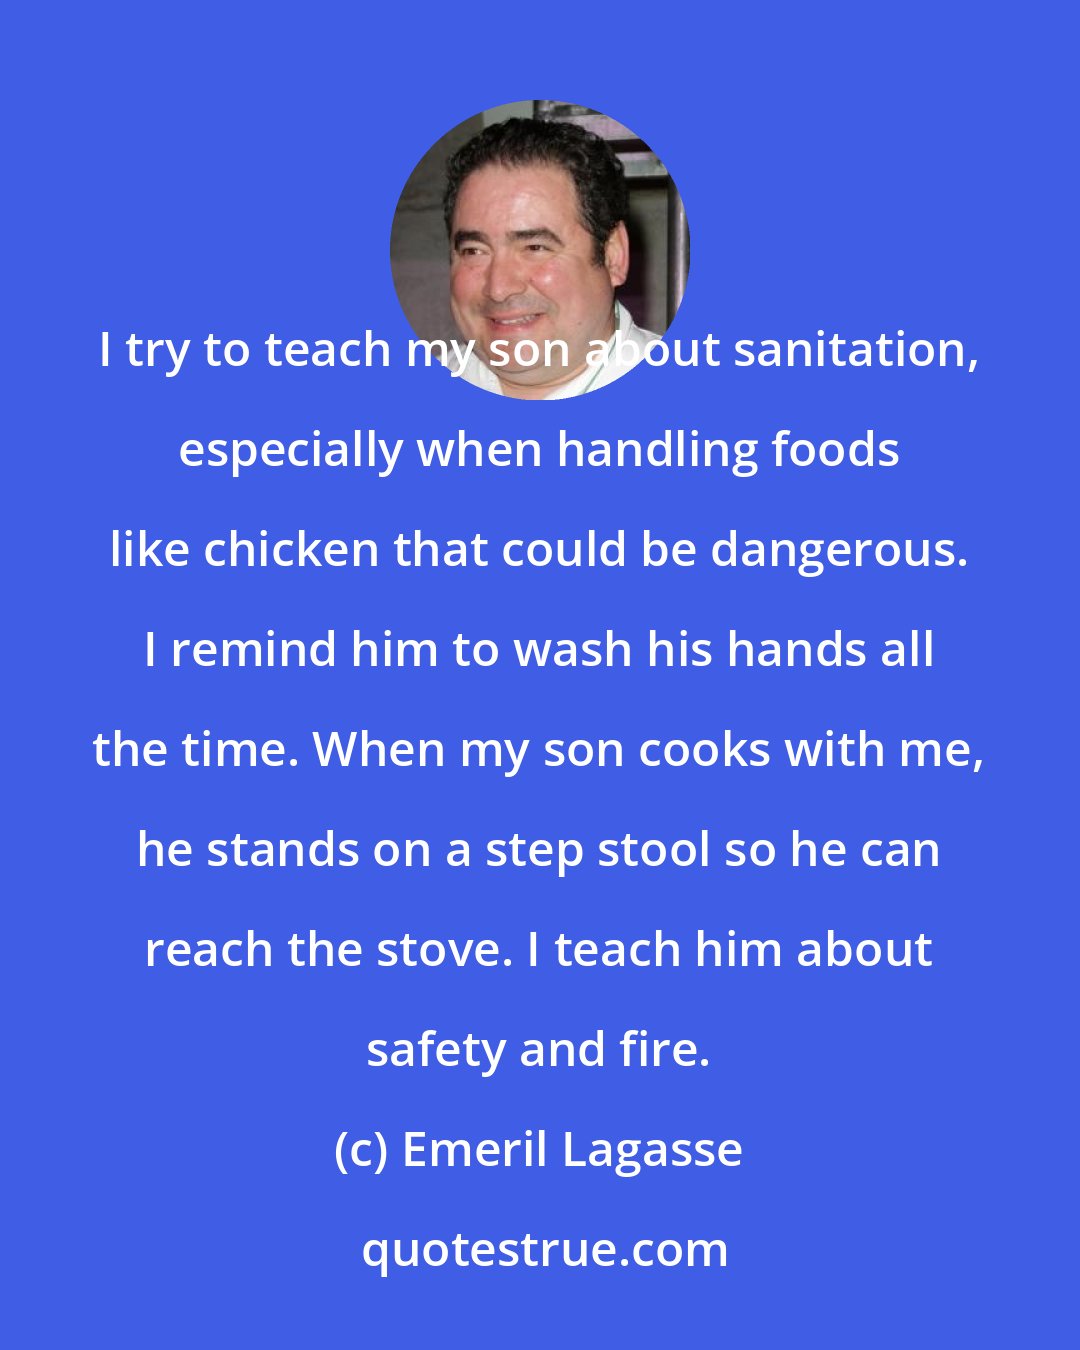 Emeril Lagasse: I try to teach my son about sanitation, especially when handling foods like chicken that could be dangerous. I remind him to wash his hands all the time. When my son cooks with me, he stands on a step stool so he can reach the stove. I teach him about safety and fire.